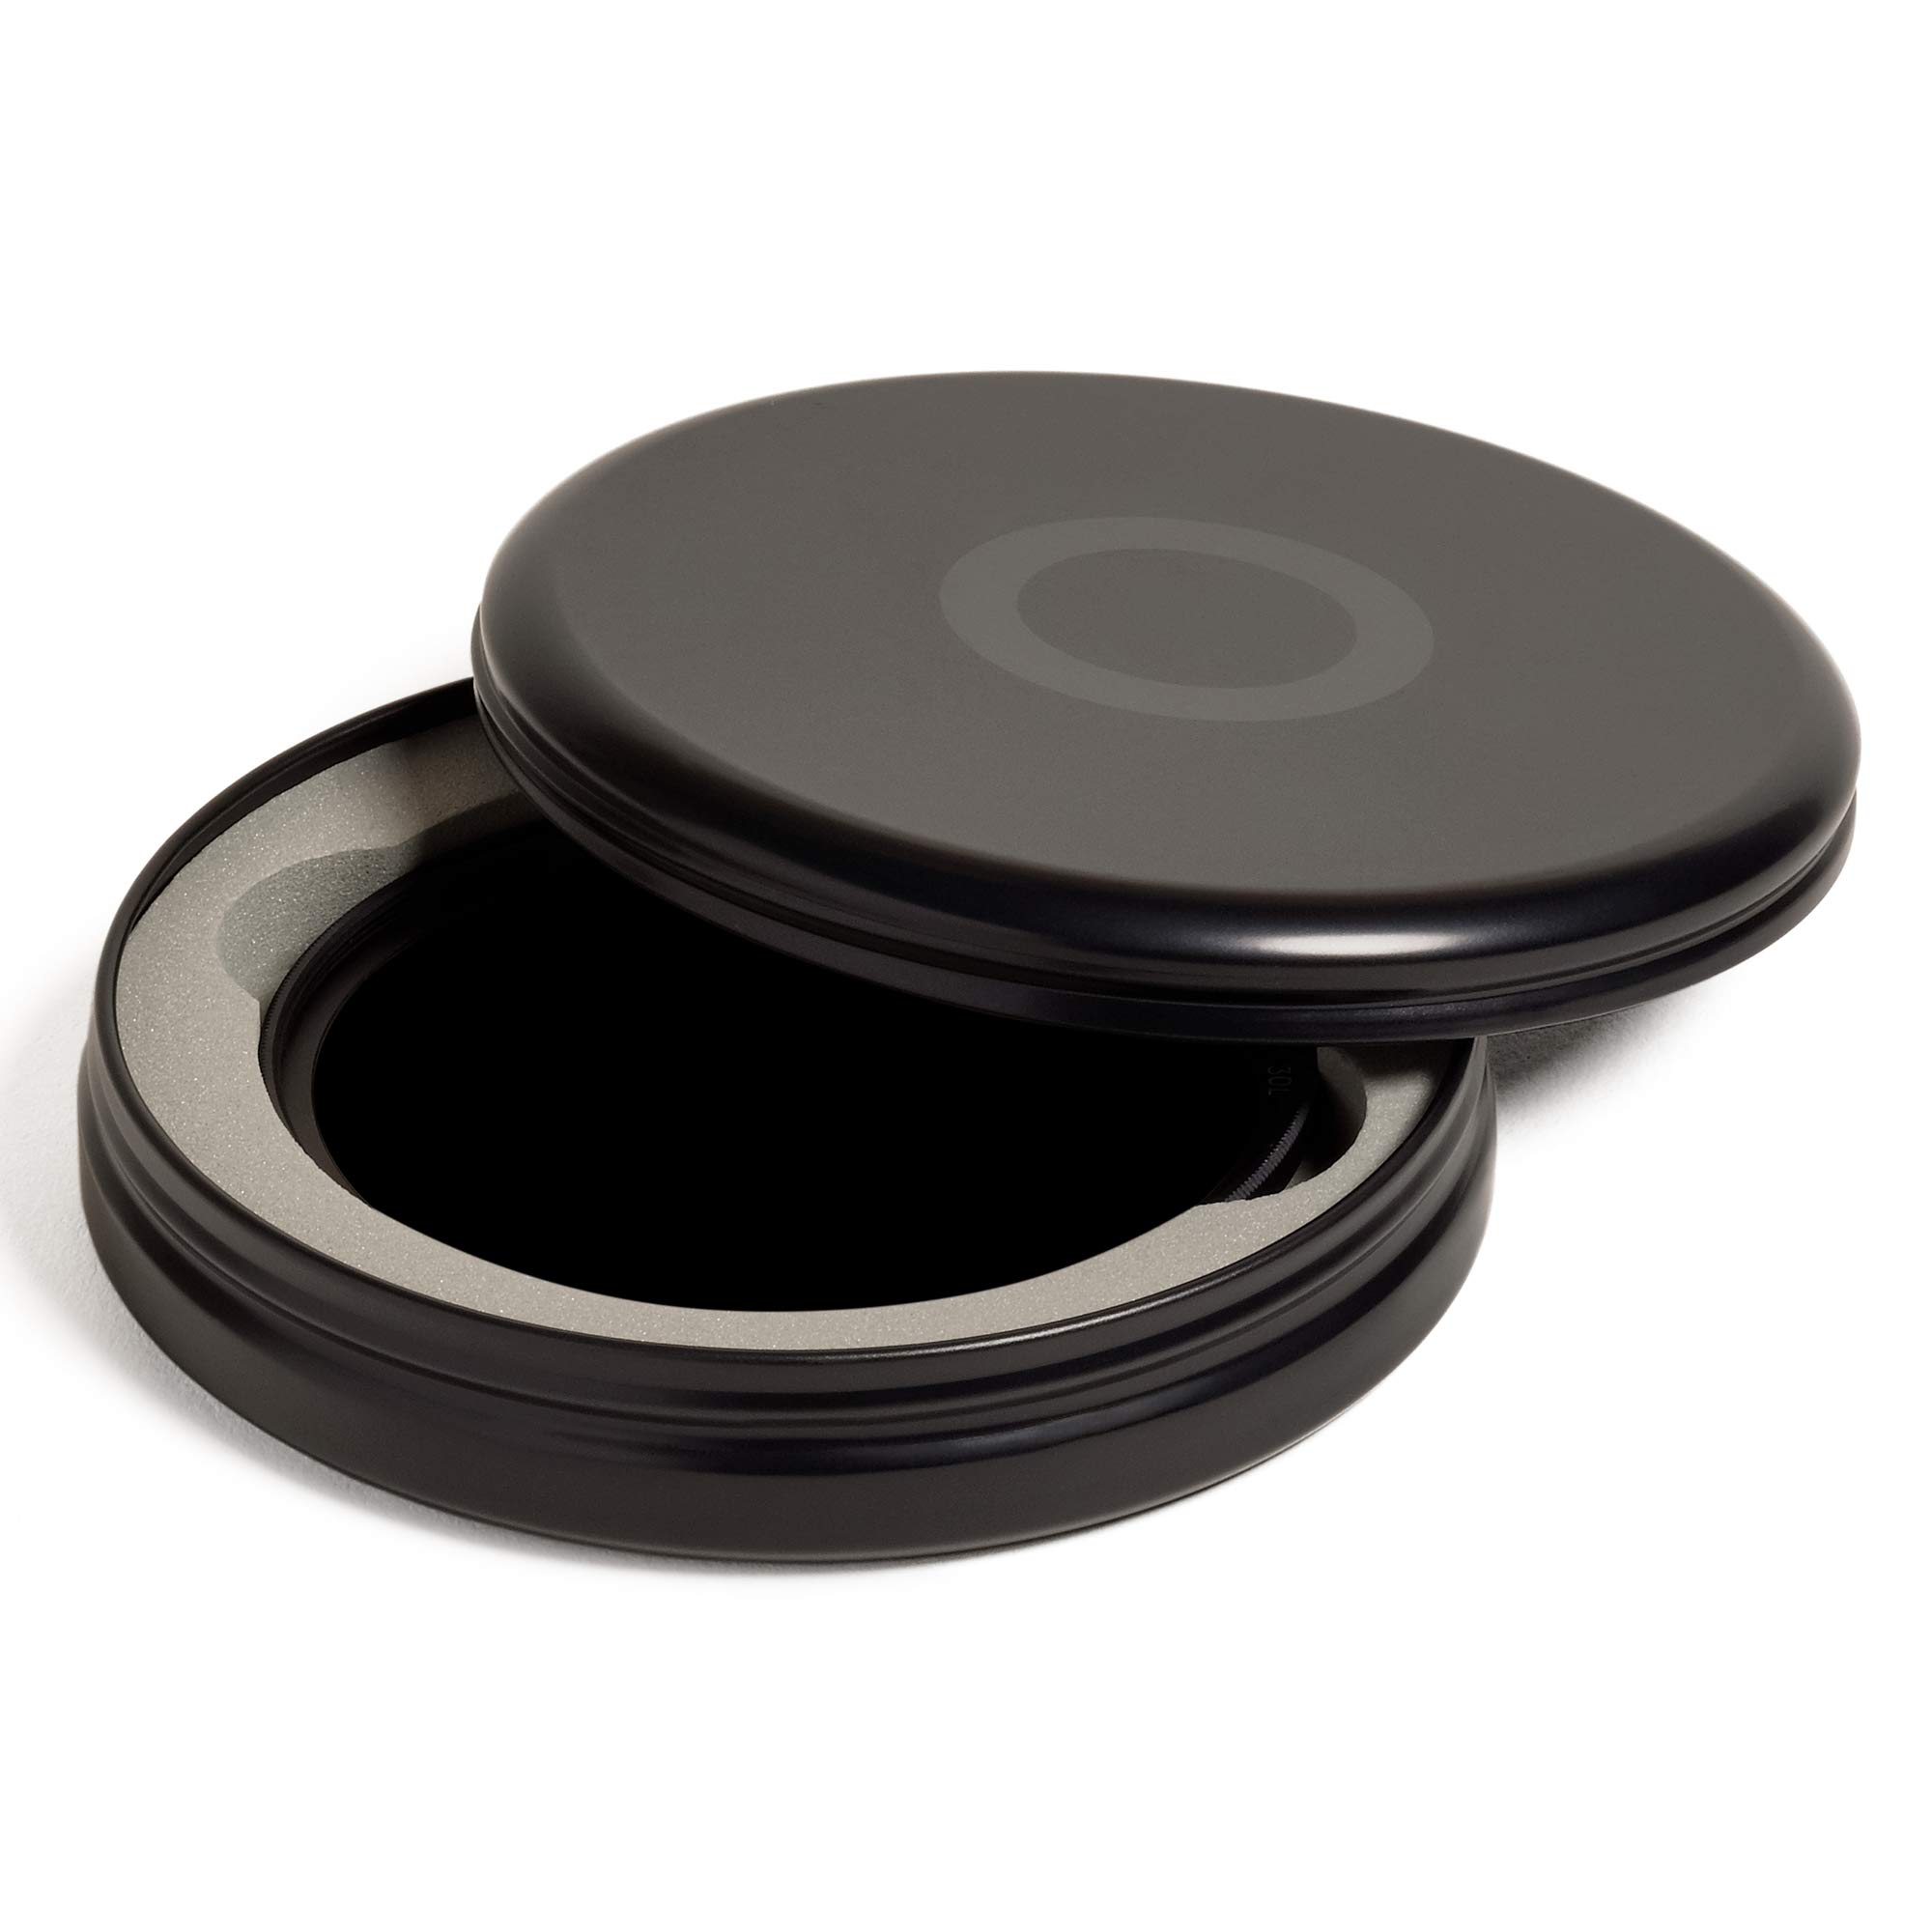 Urth 77mm ND2-400 (1-8.6 Stop) Variable ND Lens Filter